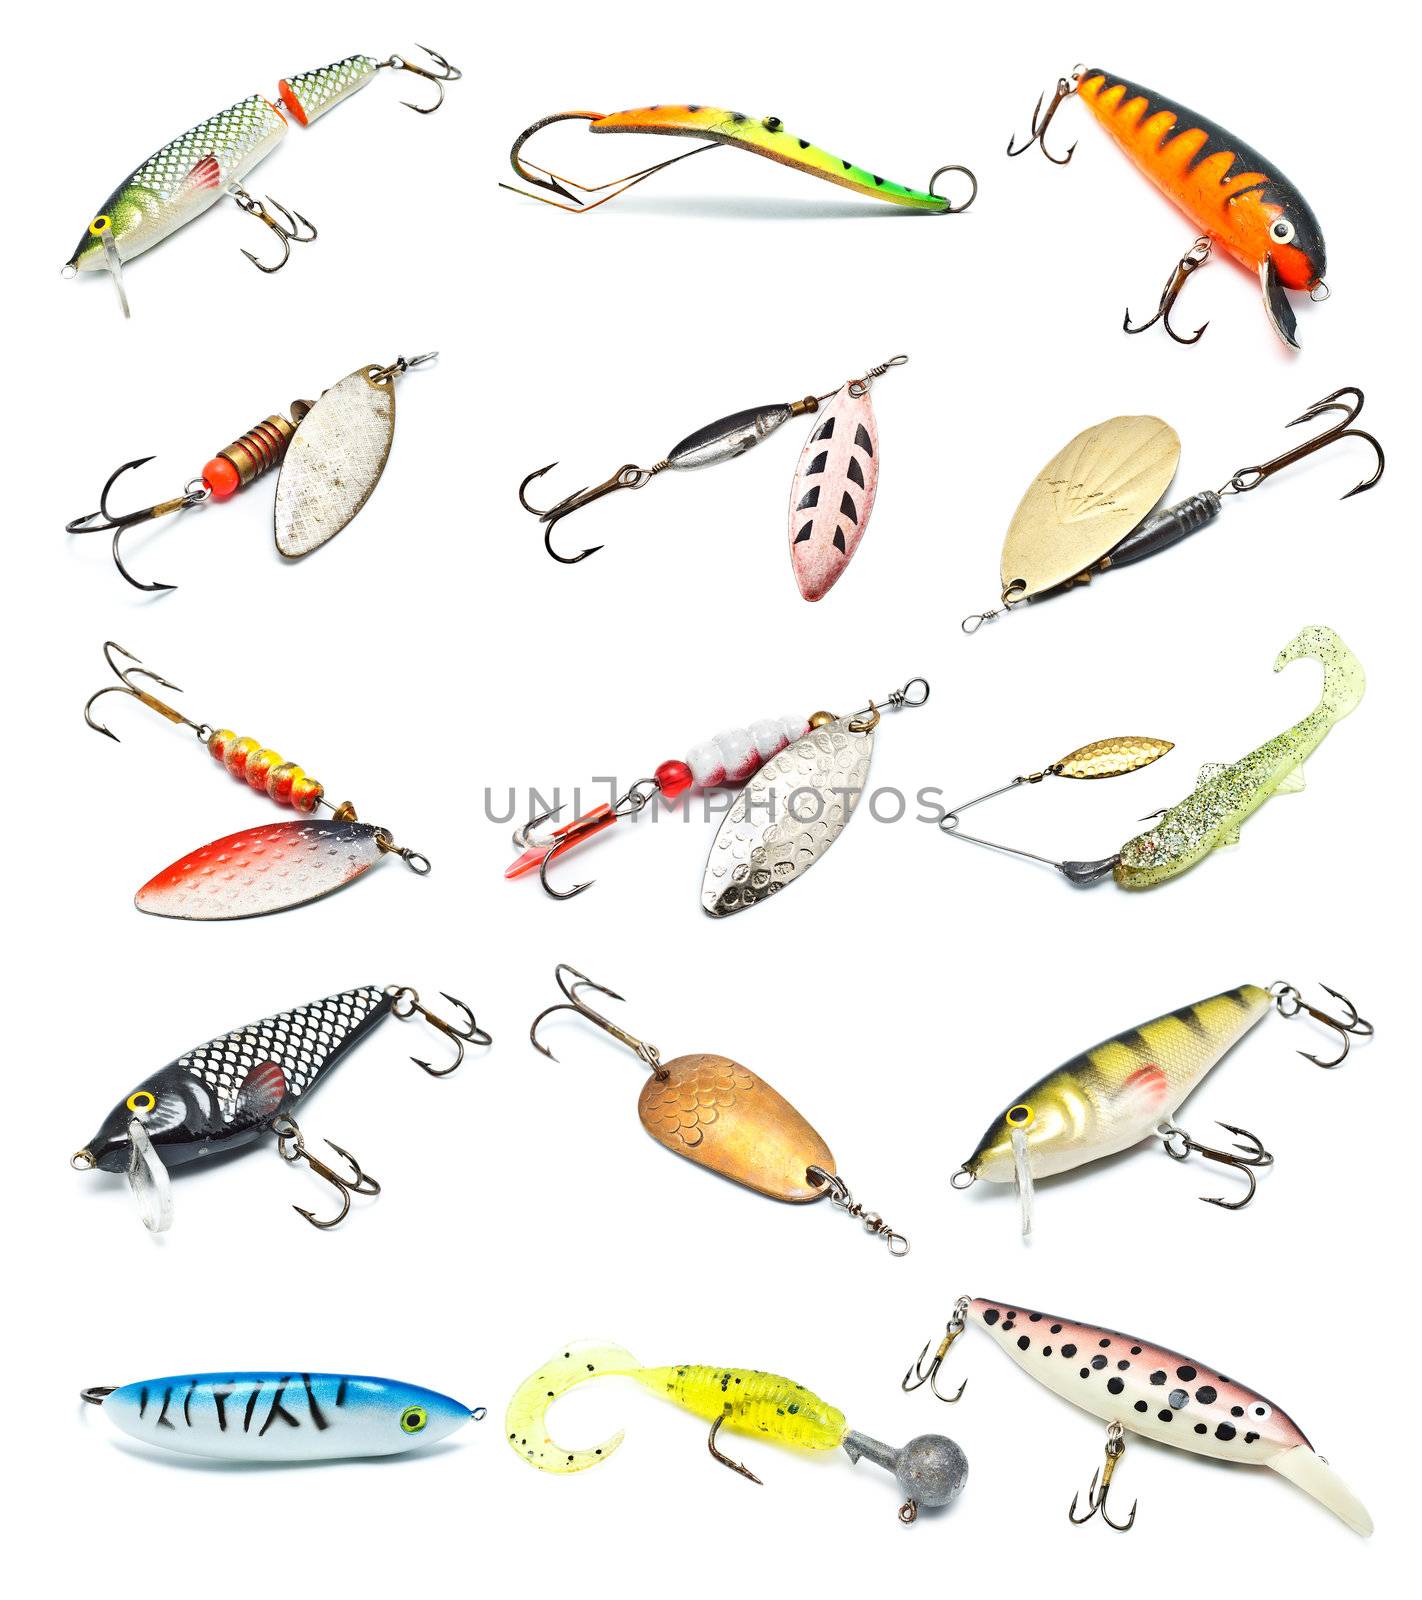 Fishing Baits Collection by petr_malyshev